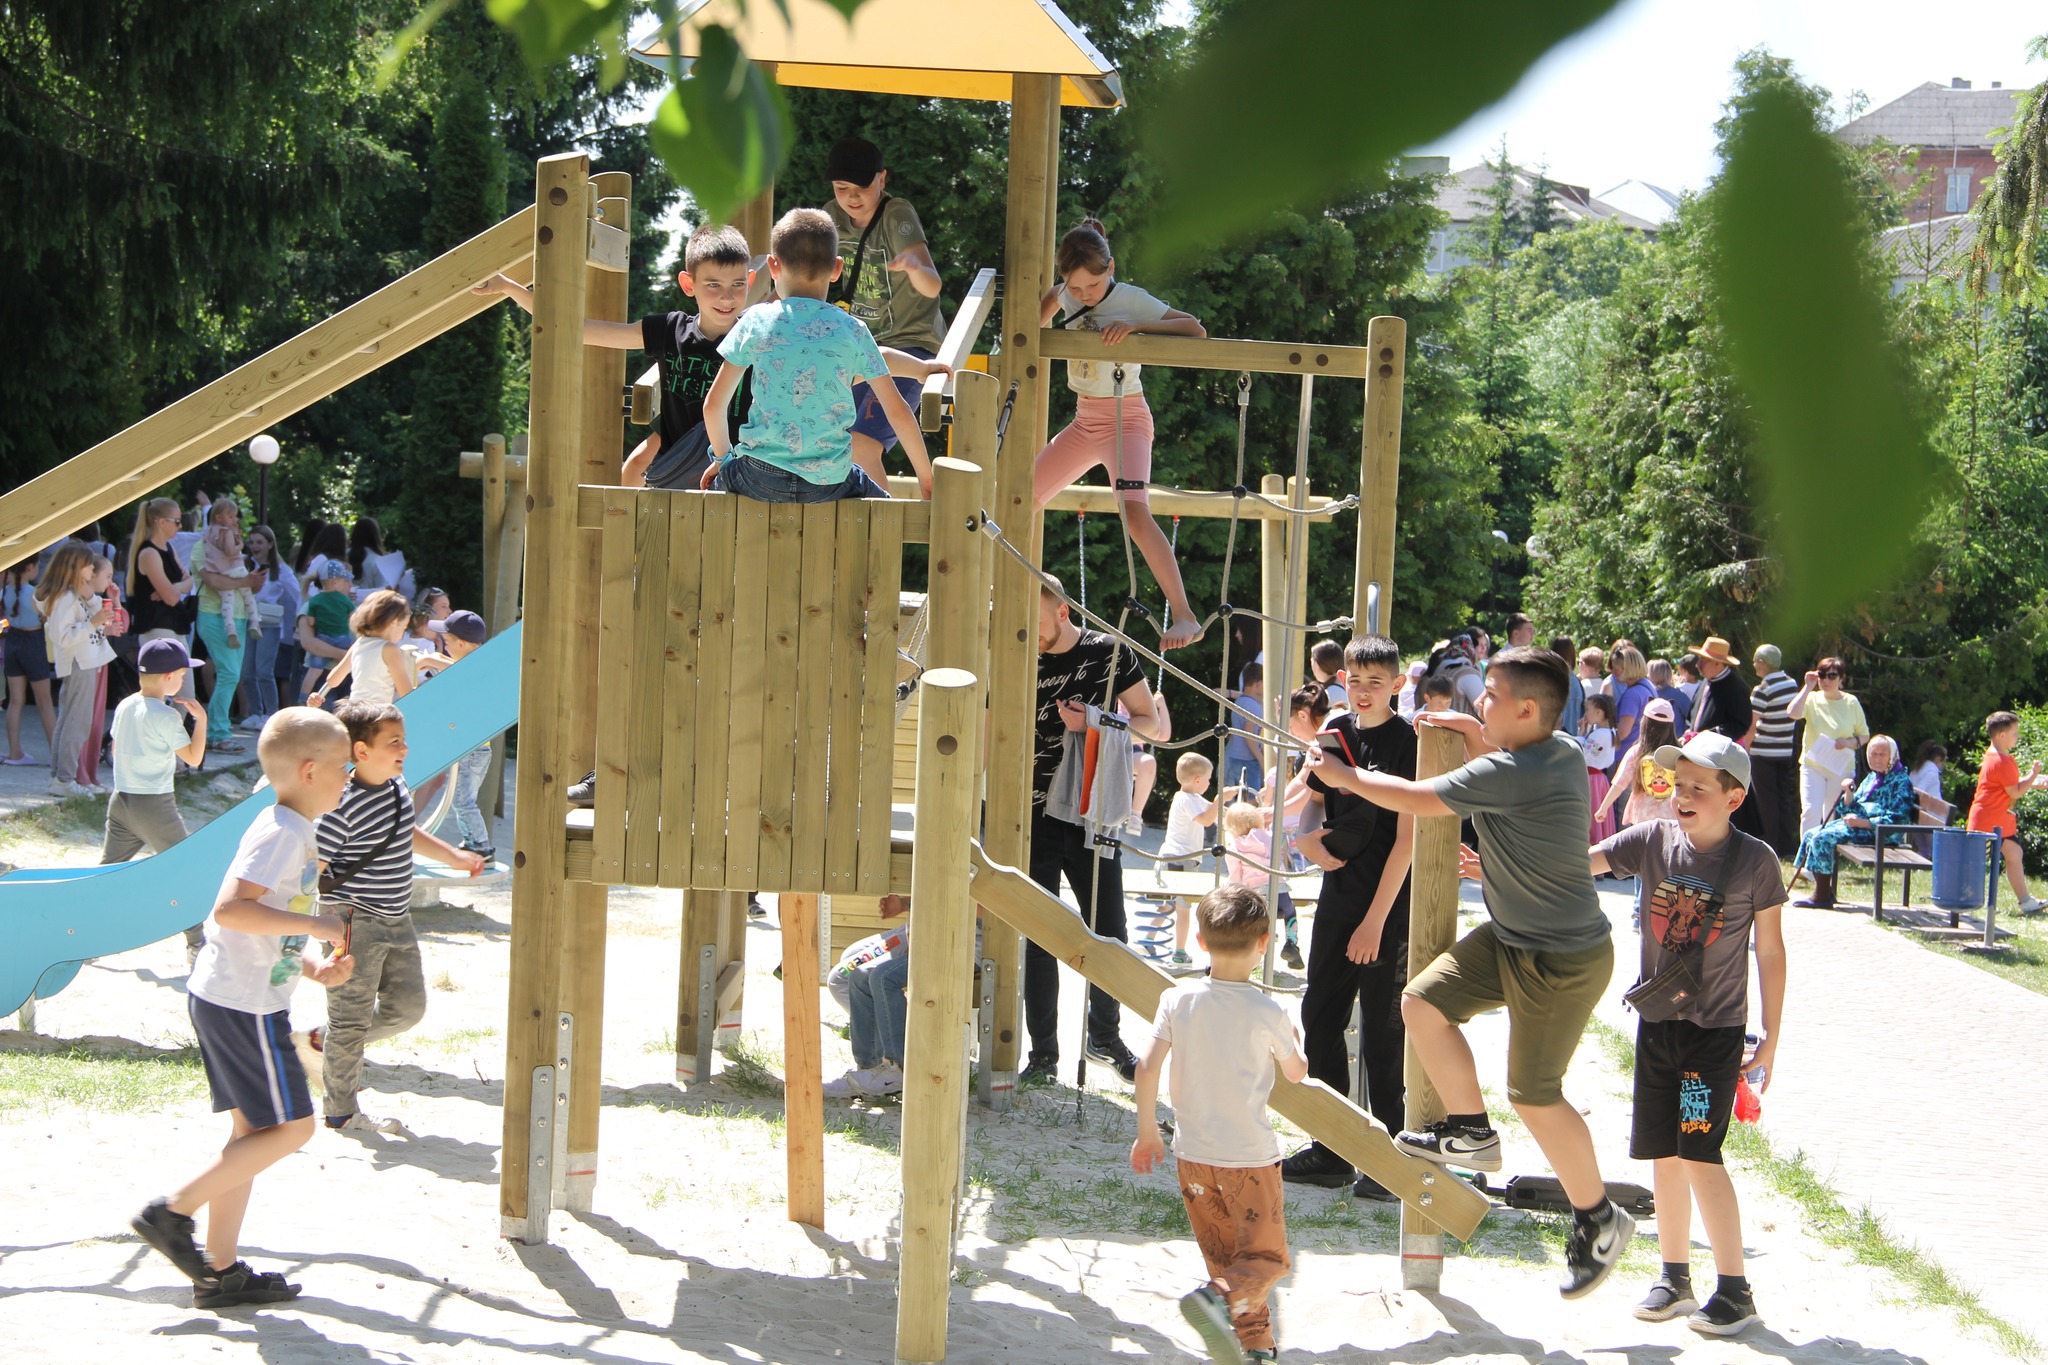 Thanks to the donation from the town of Hürth, a playground was built in the Ukrainian twin town of Peremyschljany.